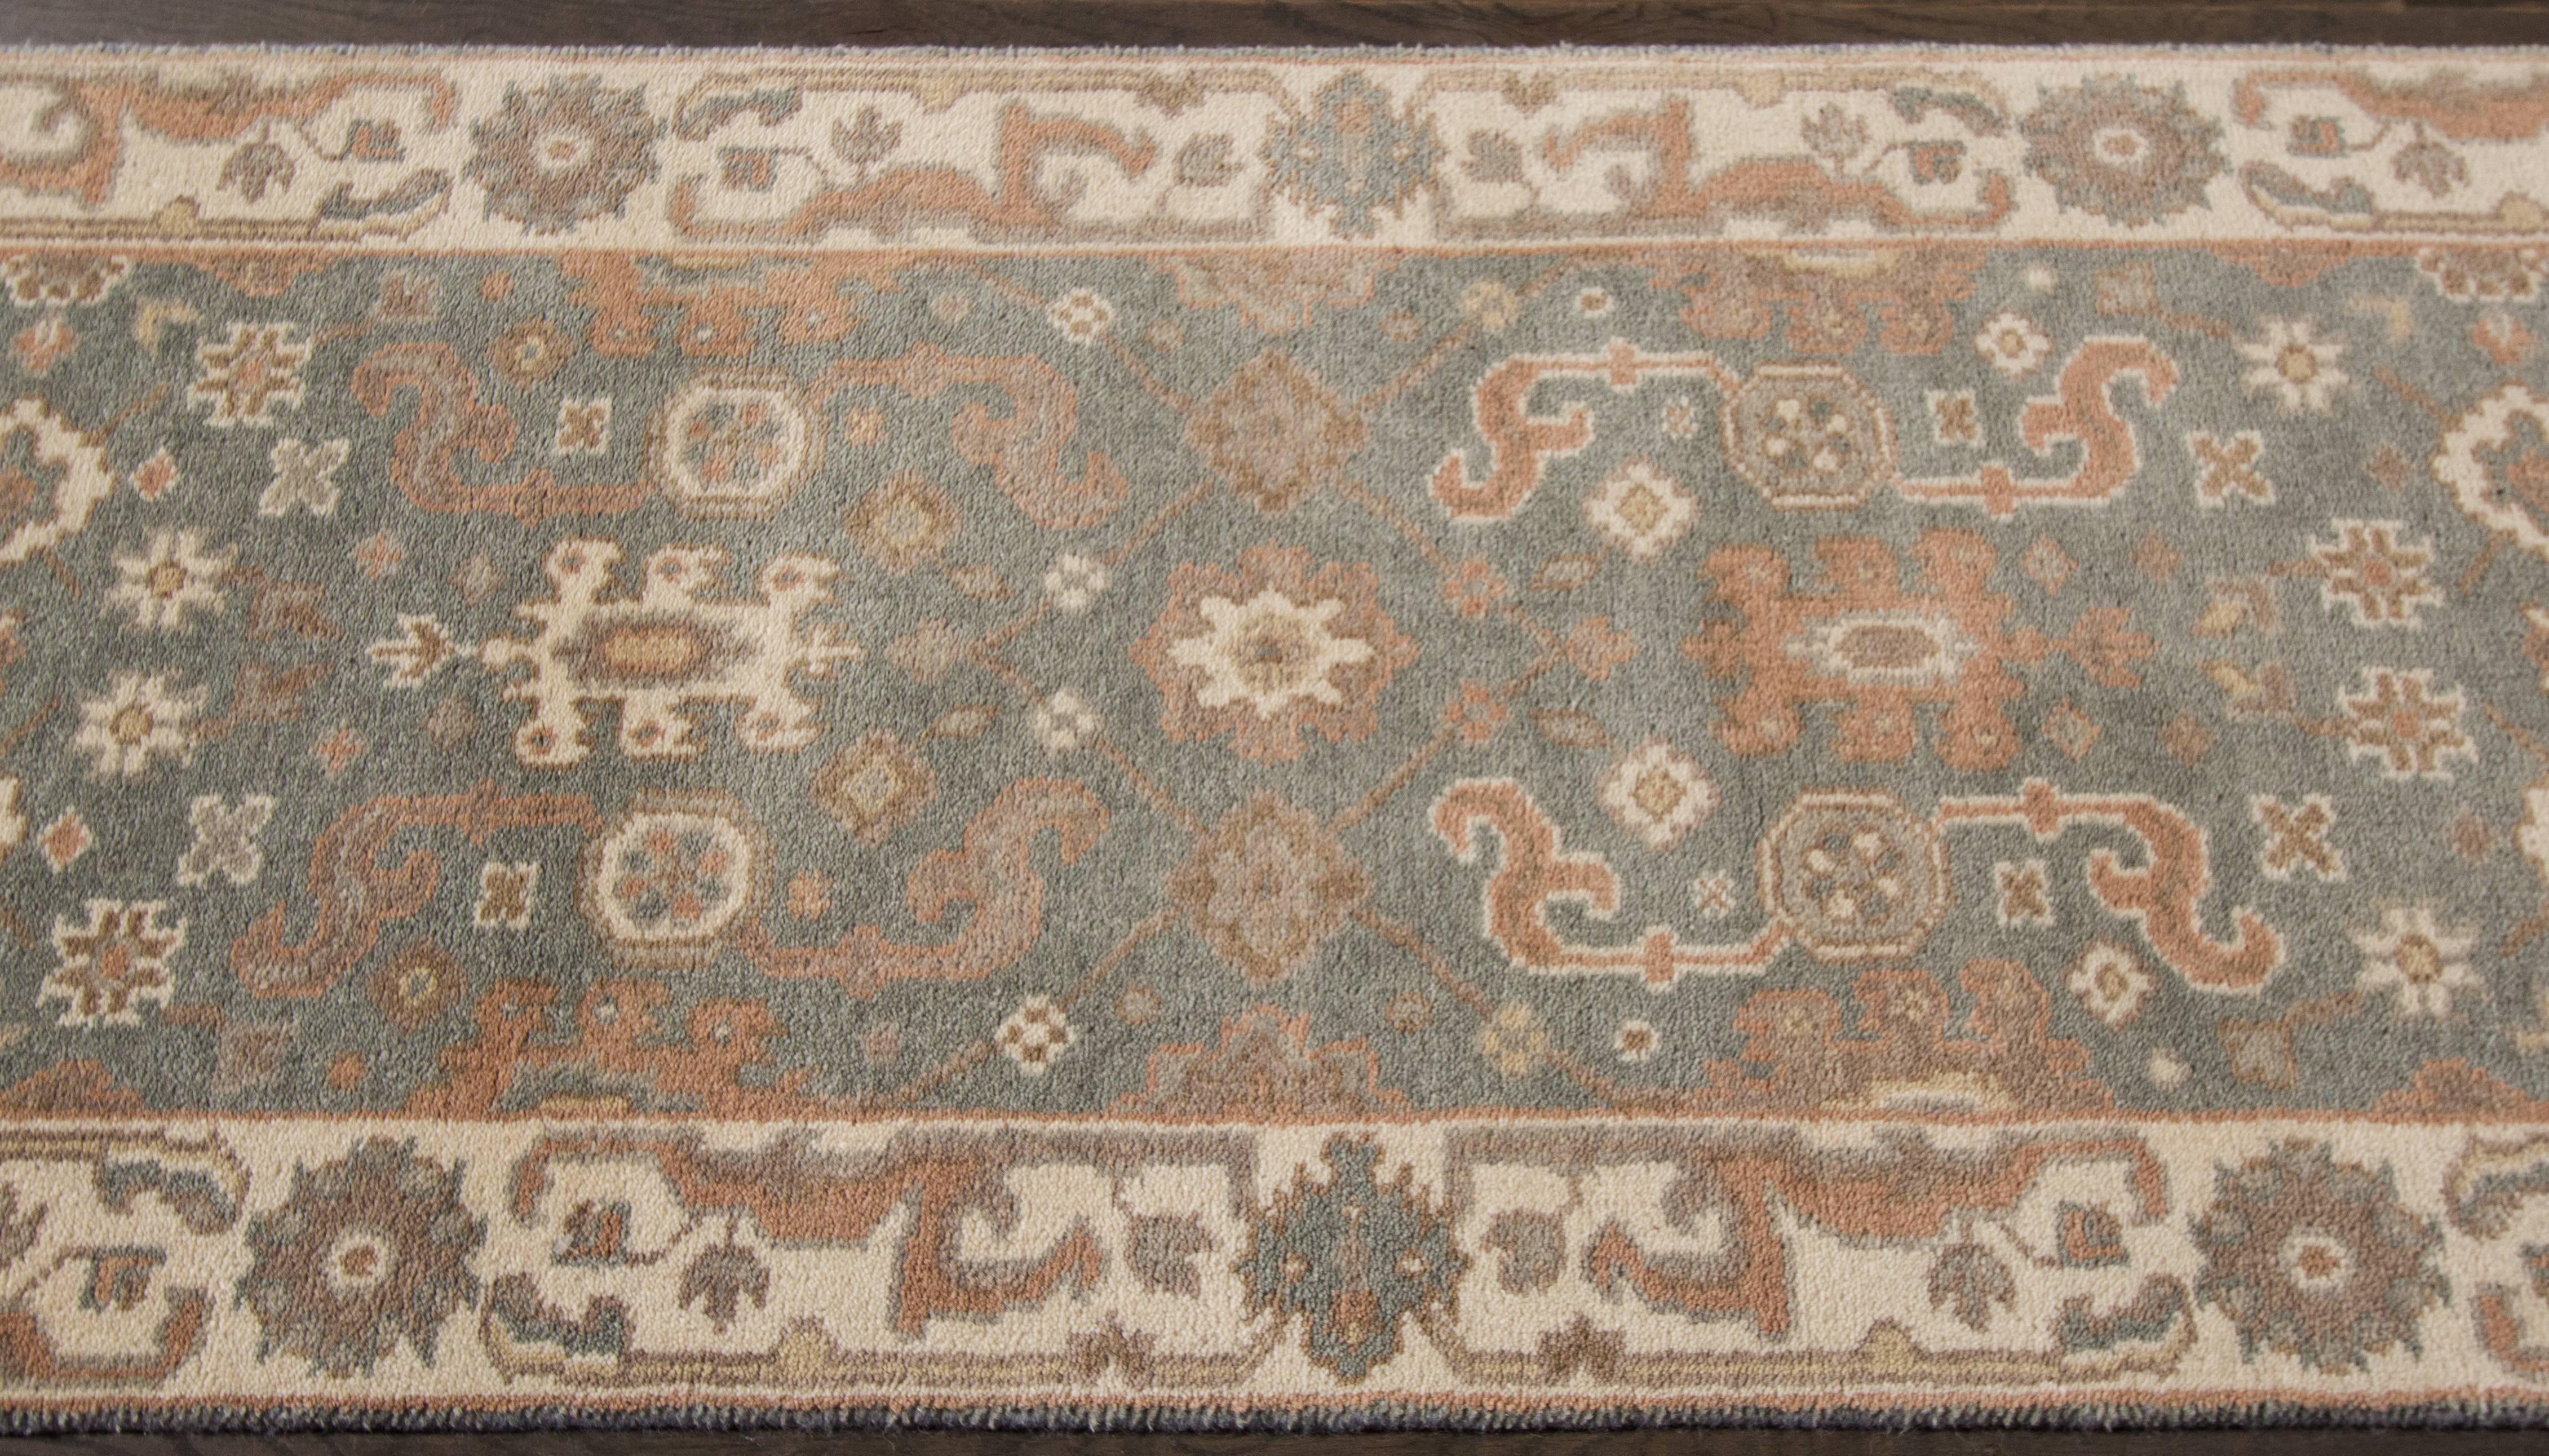 A Oushak style carpet from the 21st century.